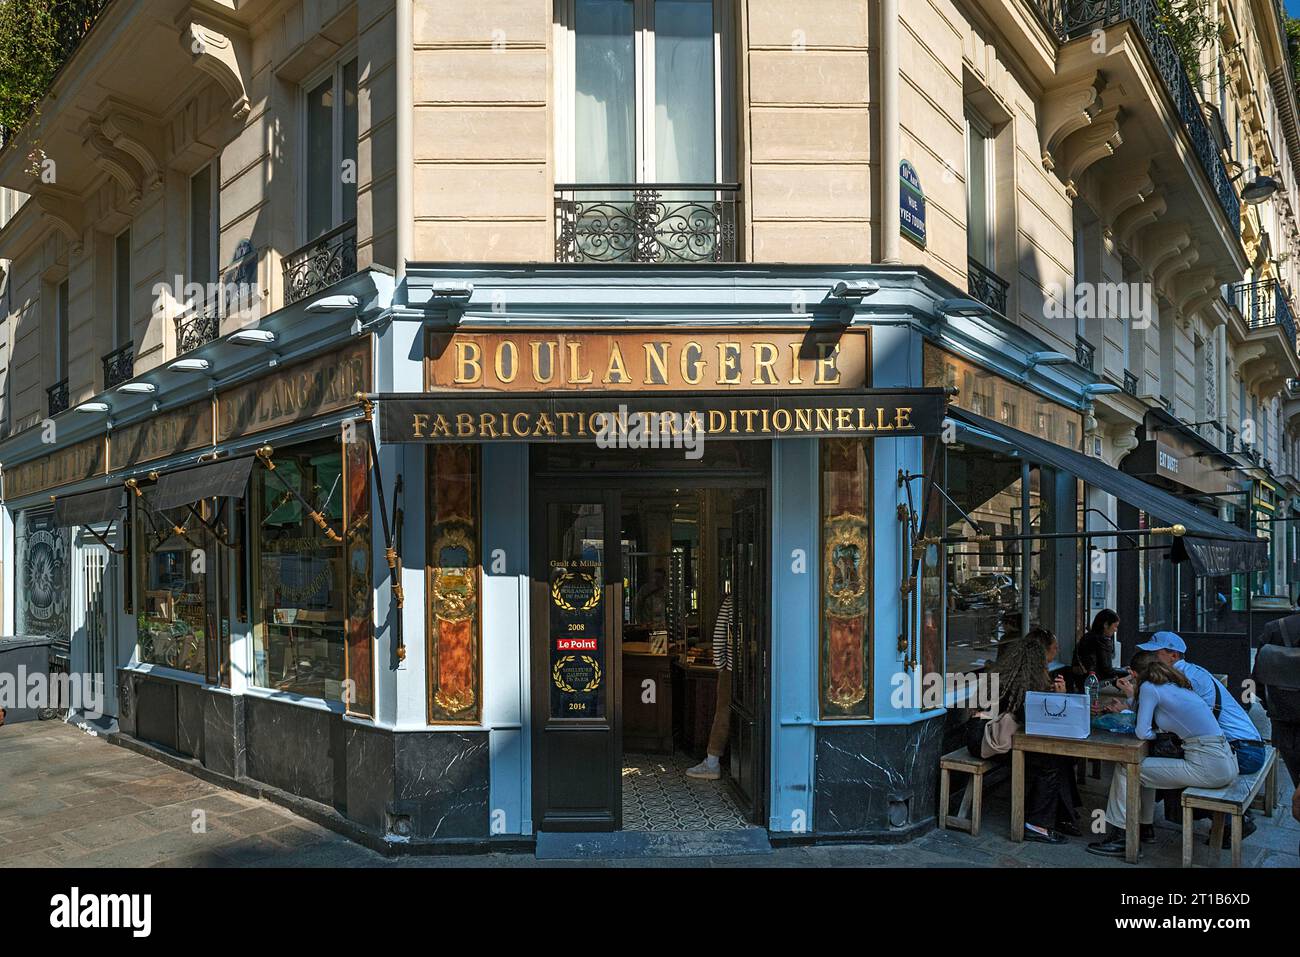 Historic bakery from 1875, Boulangerie La traditionnel, 34 Rue Yves Toudic, Paris, France Stock Photo